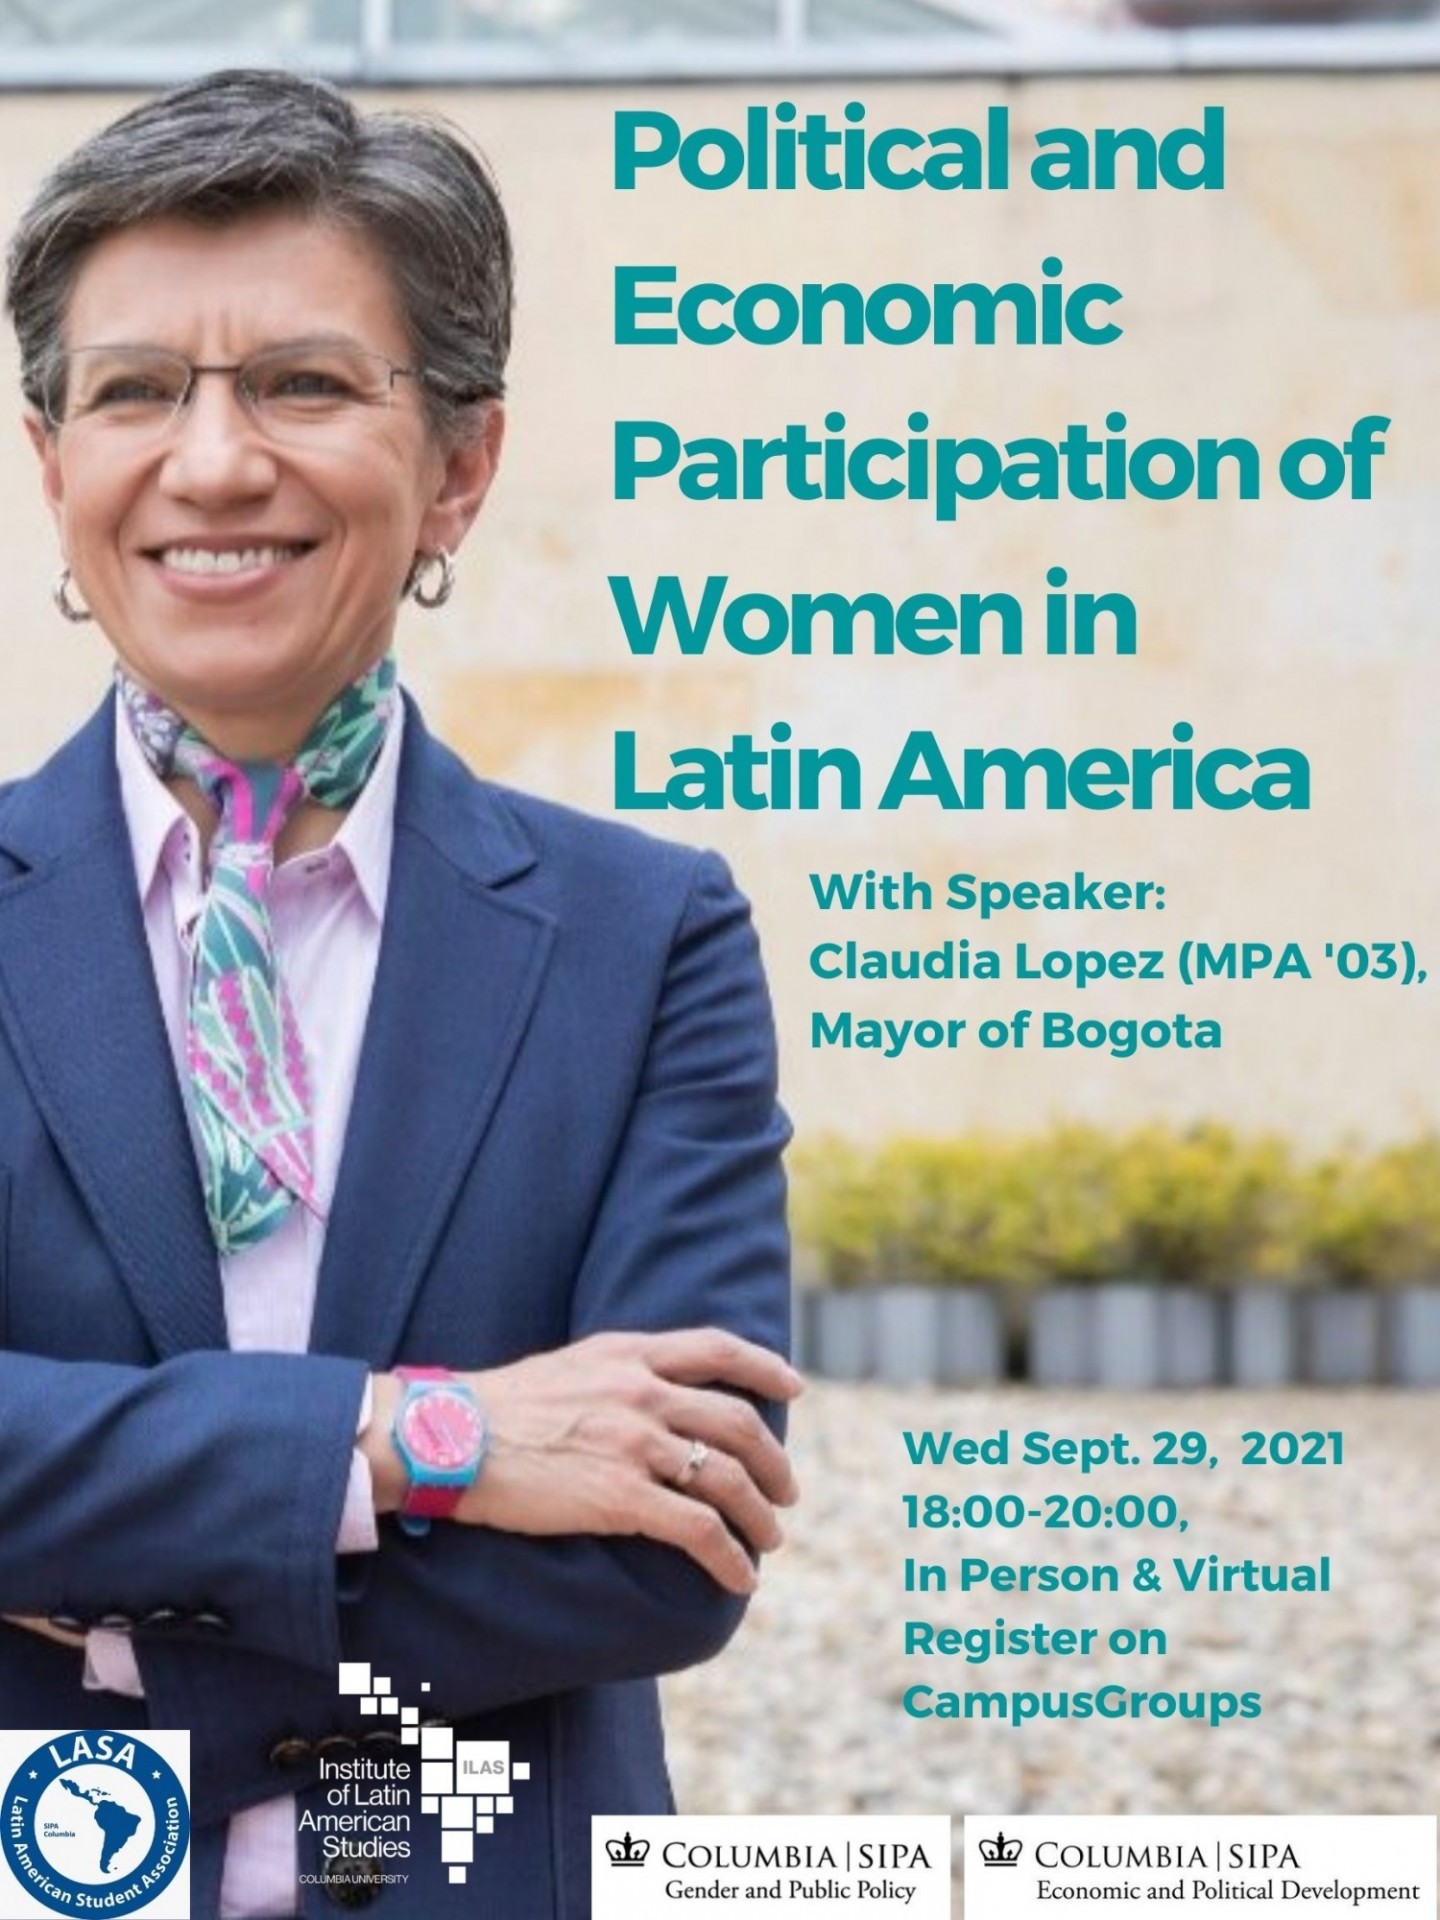 Political and Economic Participation of Women in Latin America